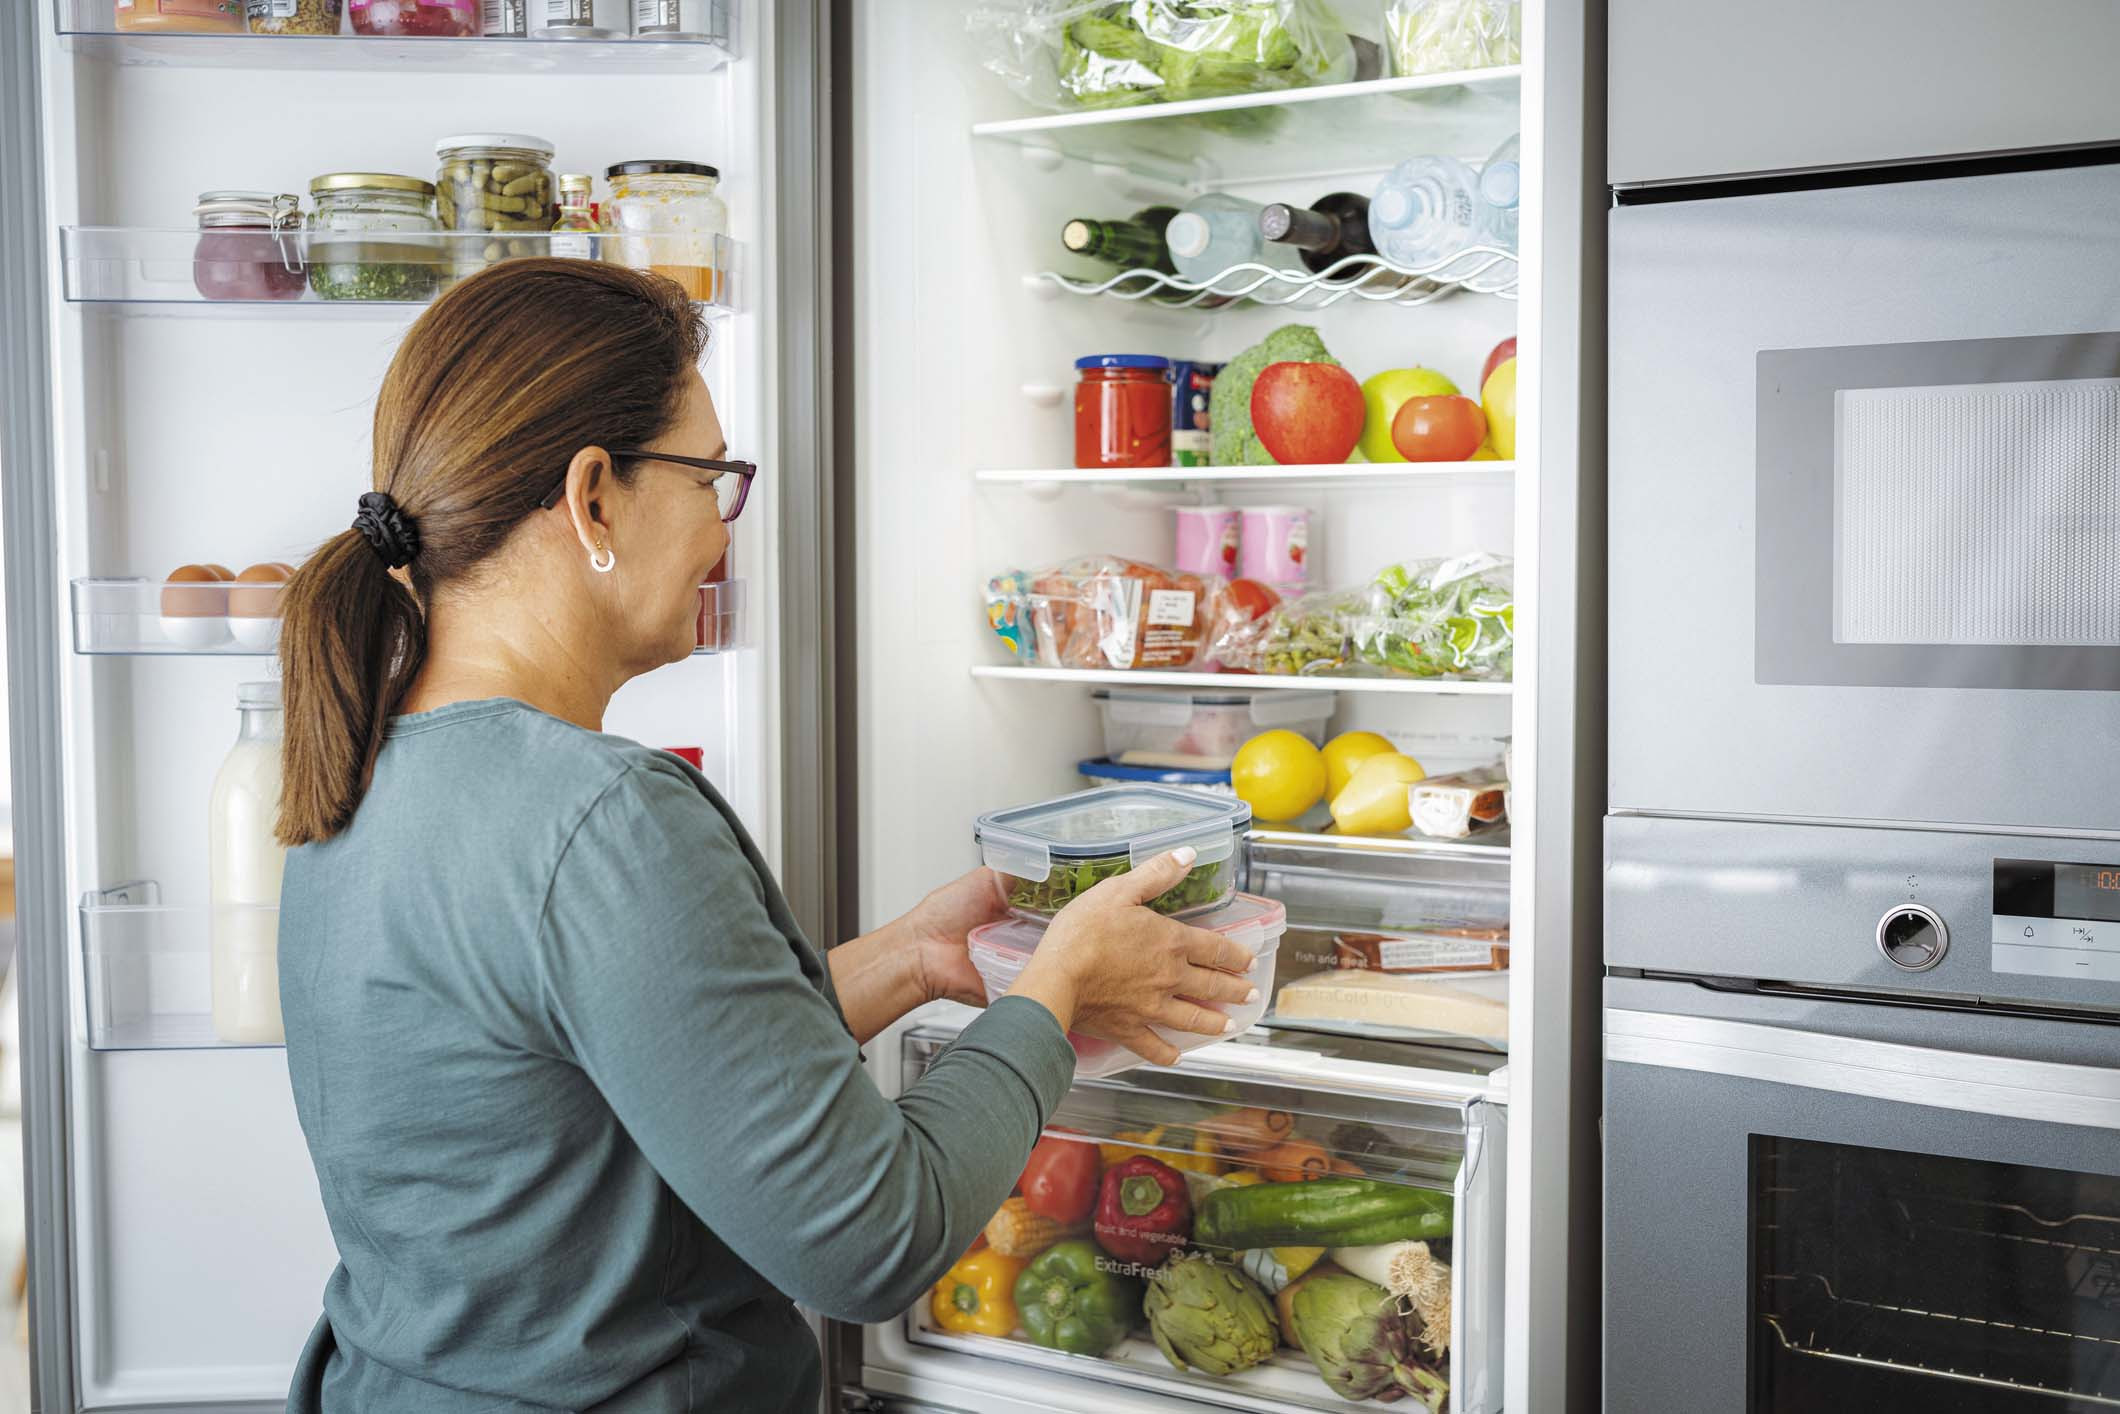 photo of a woman viewed from behind as she is putting food containers into her refrigerator